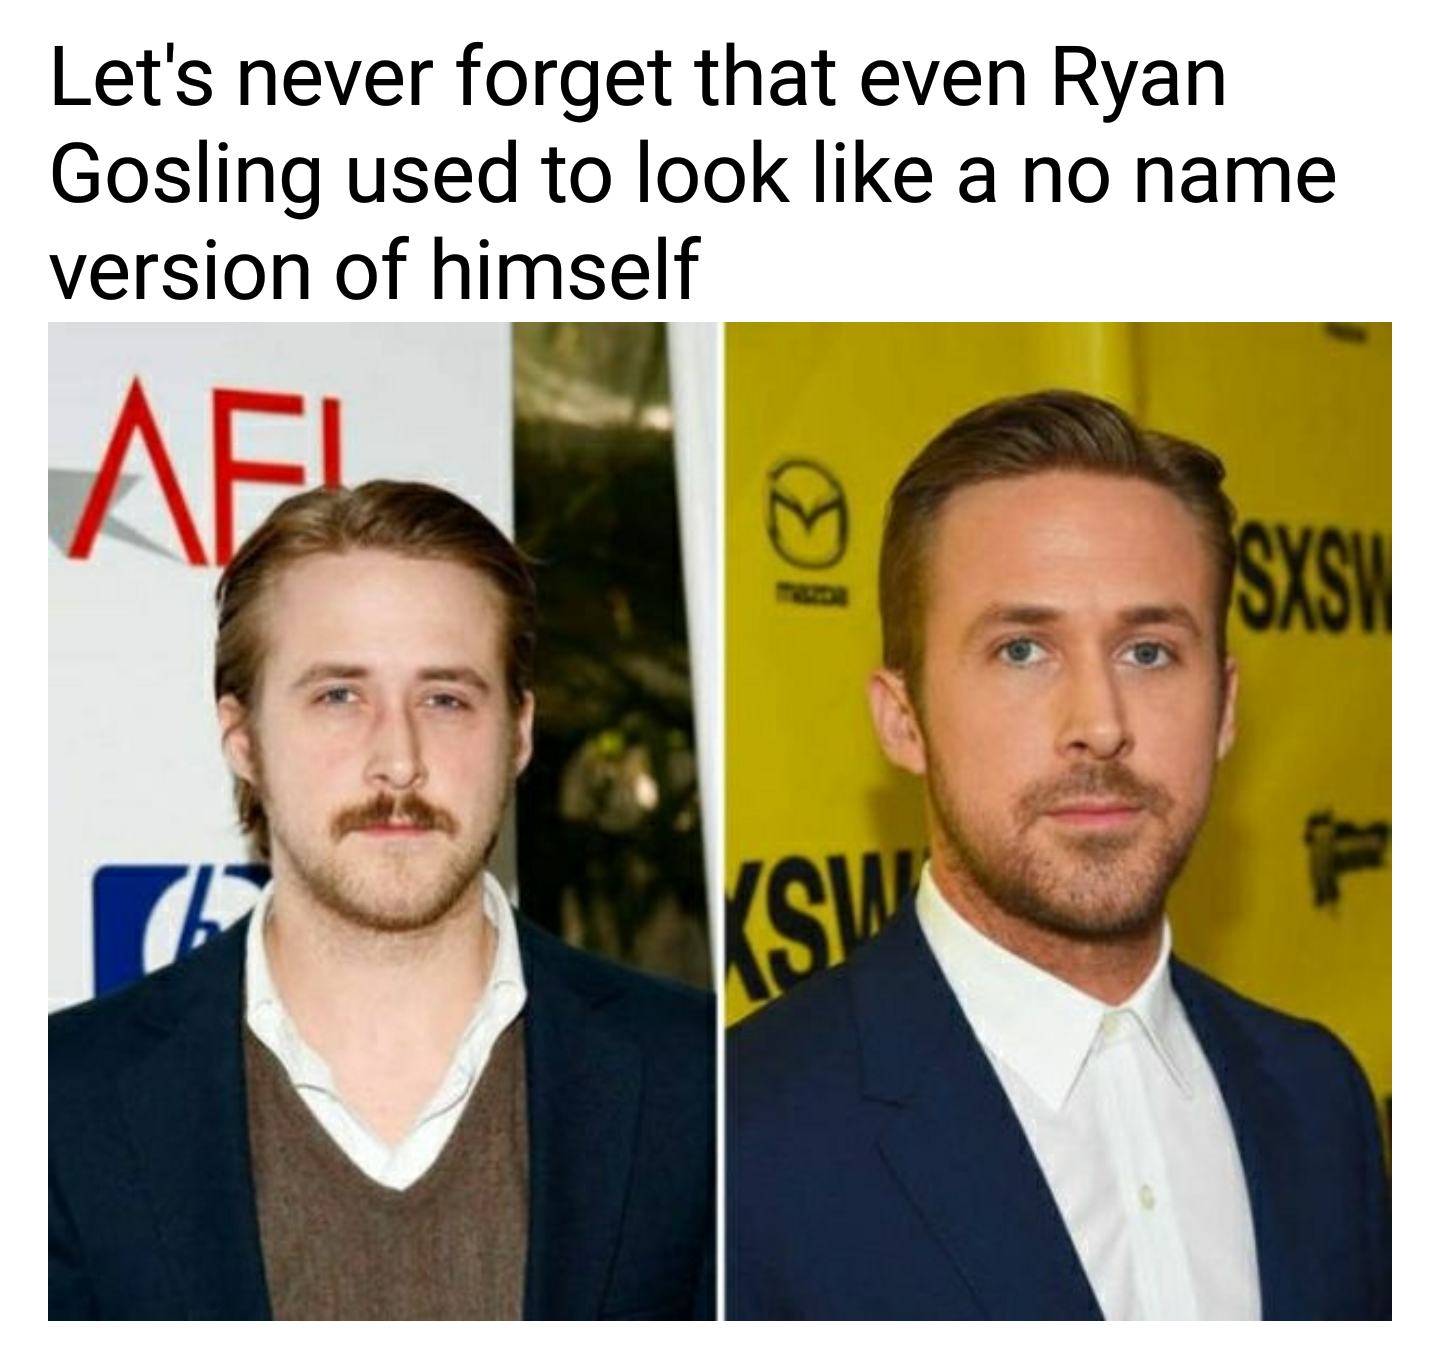 look like ryan gosling meme - Let's never forget that even Ryan Gosling used to look a no name version of himself Af